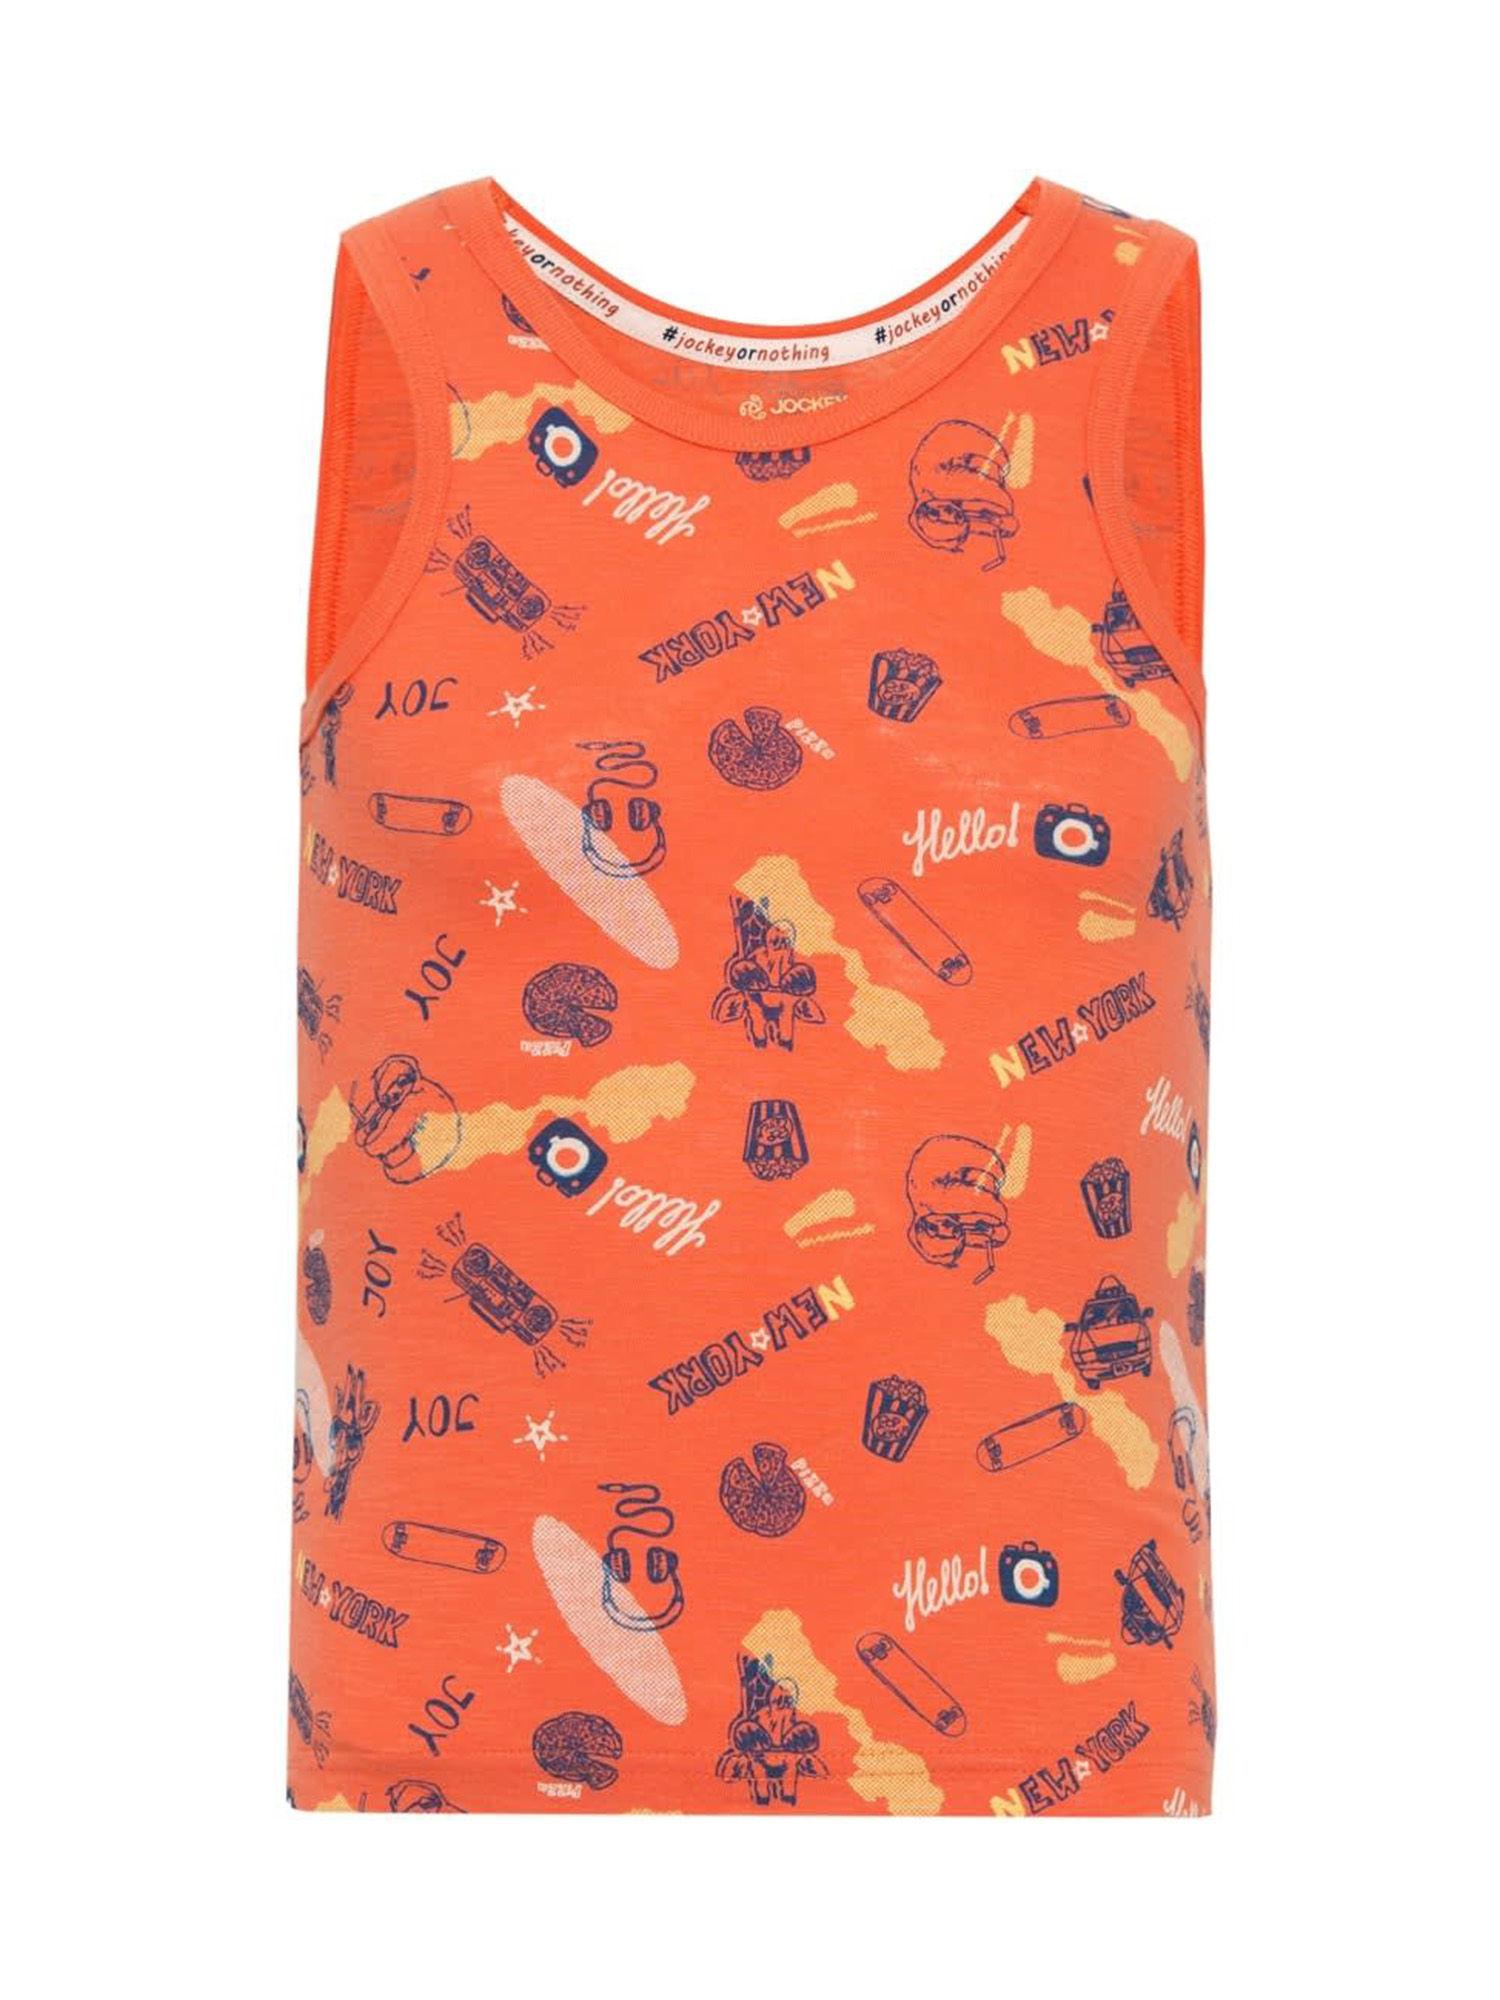 ember glow printed tank top - style number - (cb01)